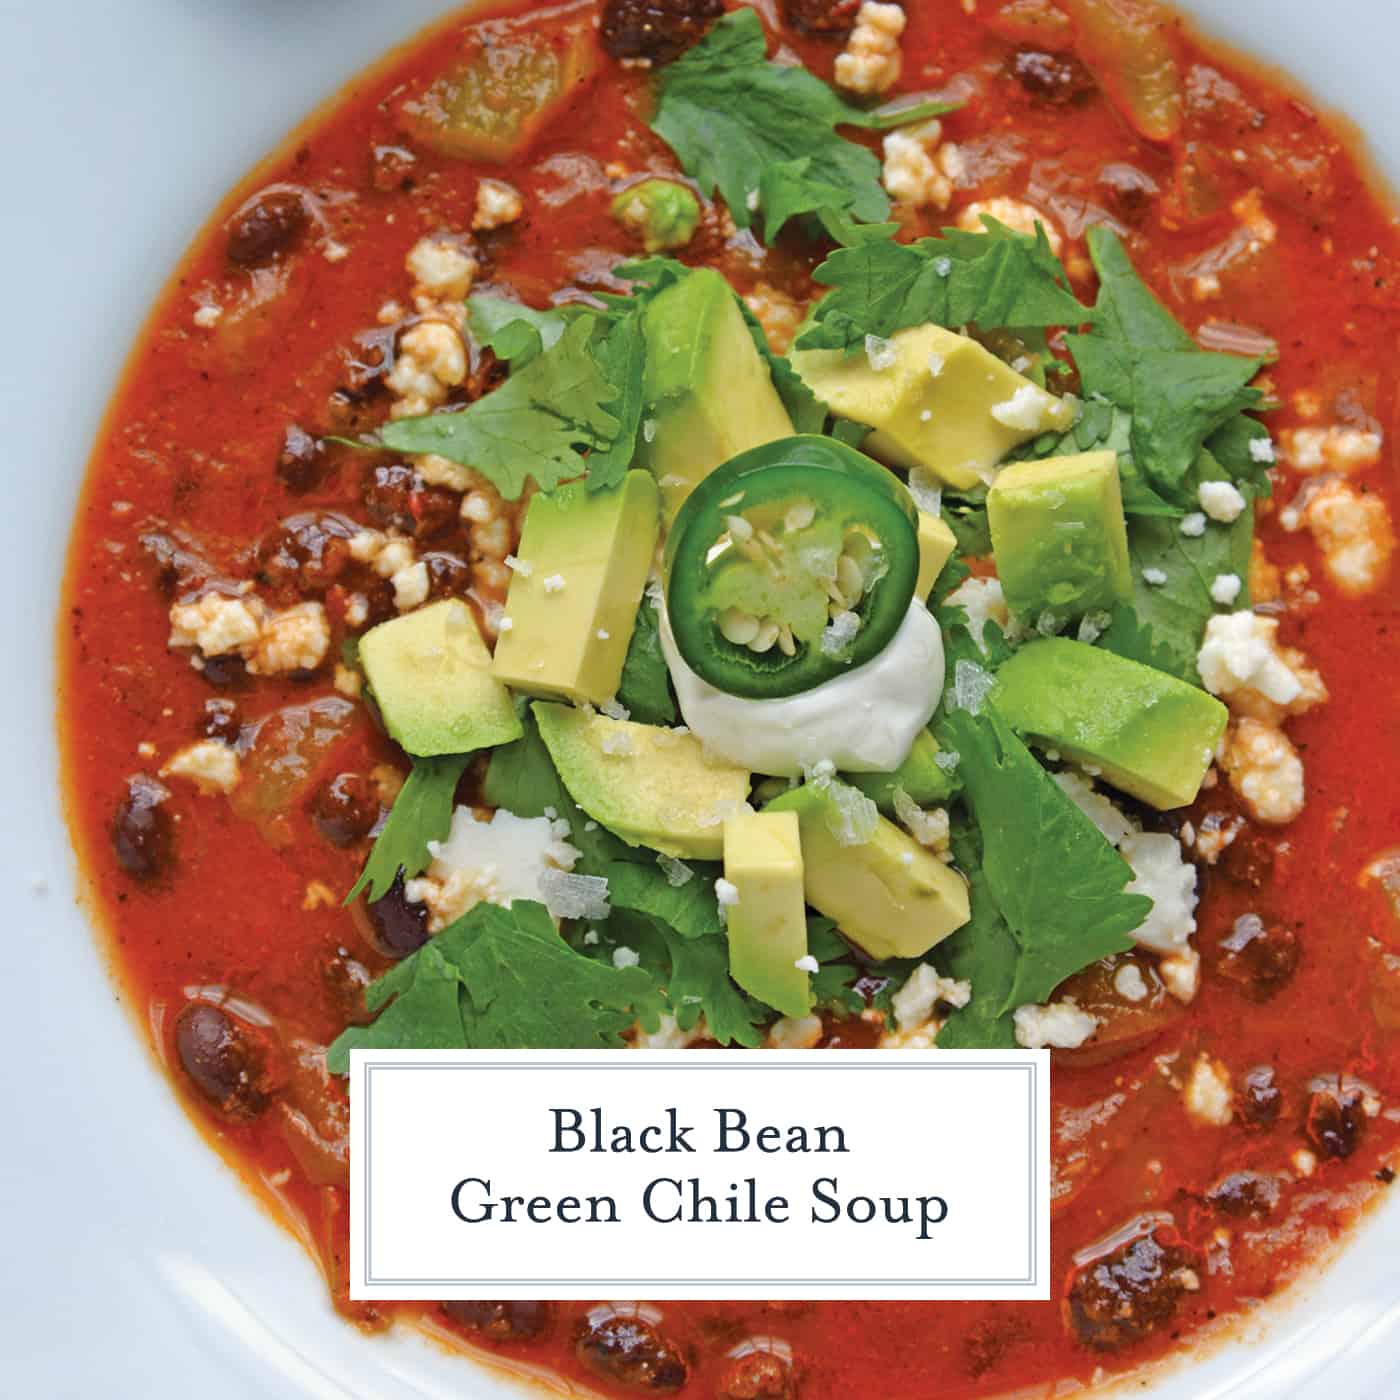 Black bean green chile soup is a tomato based soup with smoky chipotle peppers and robust flavors. Top with avocado, cilantro and queso fresco! #easysoups #souprecipes www.savoryexperiments.com 